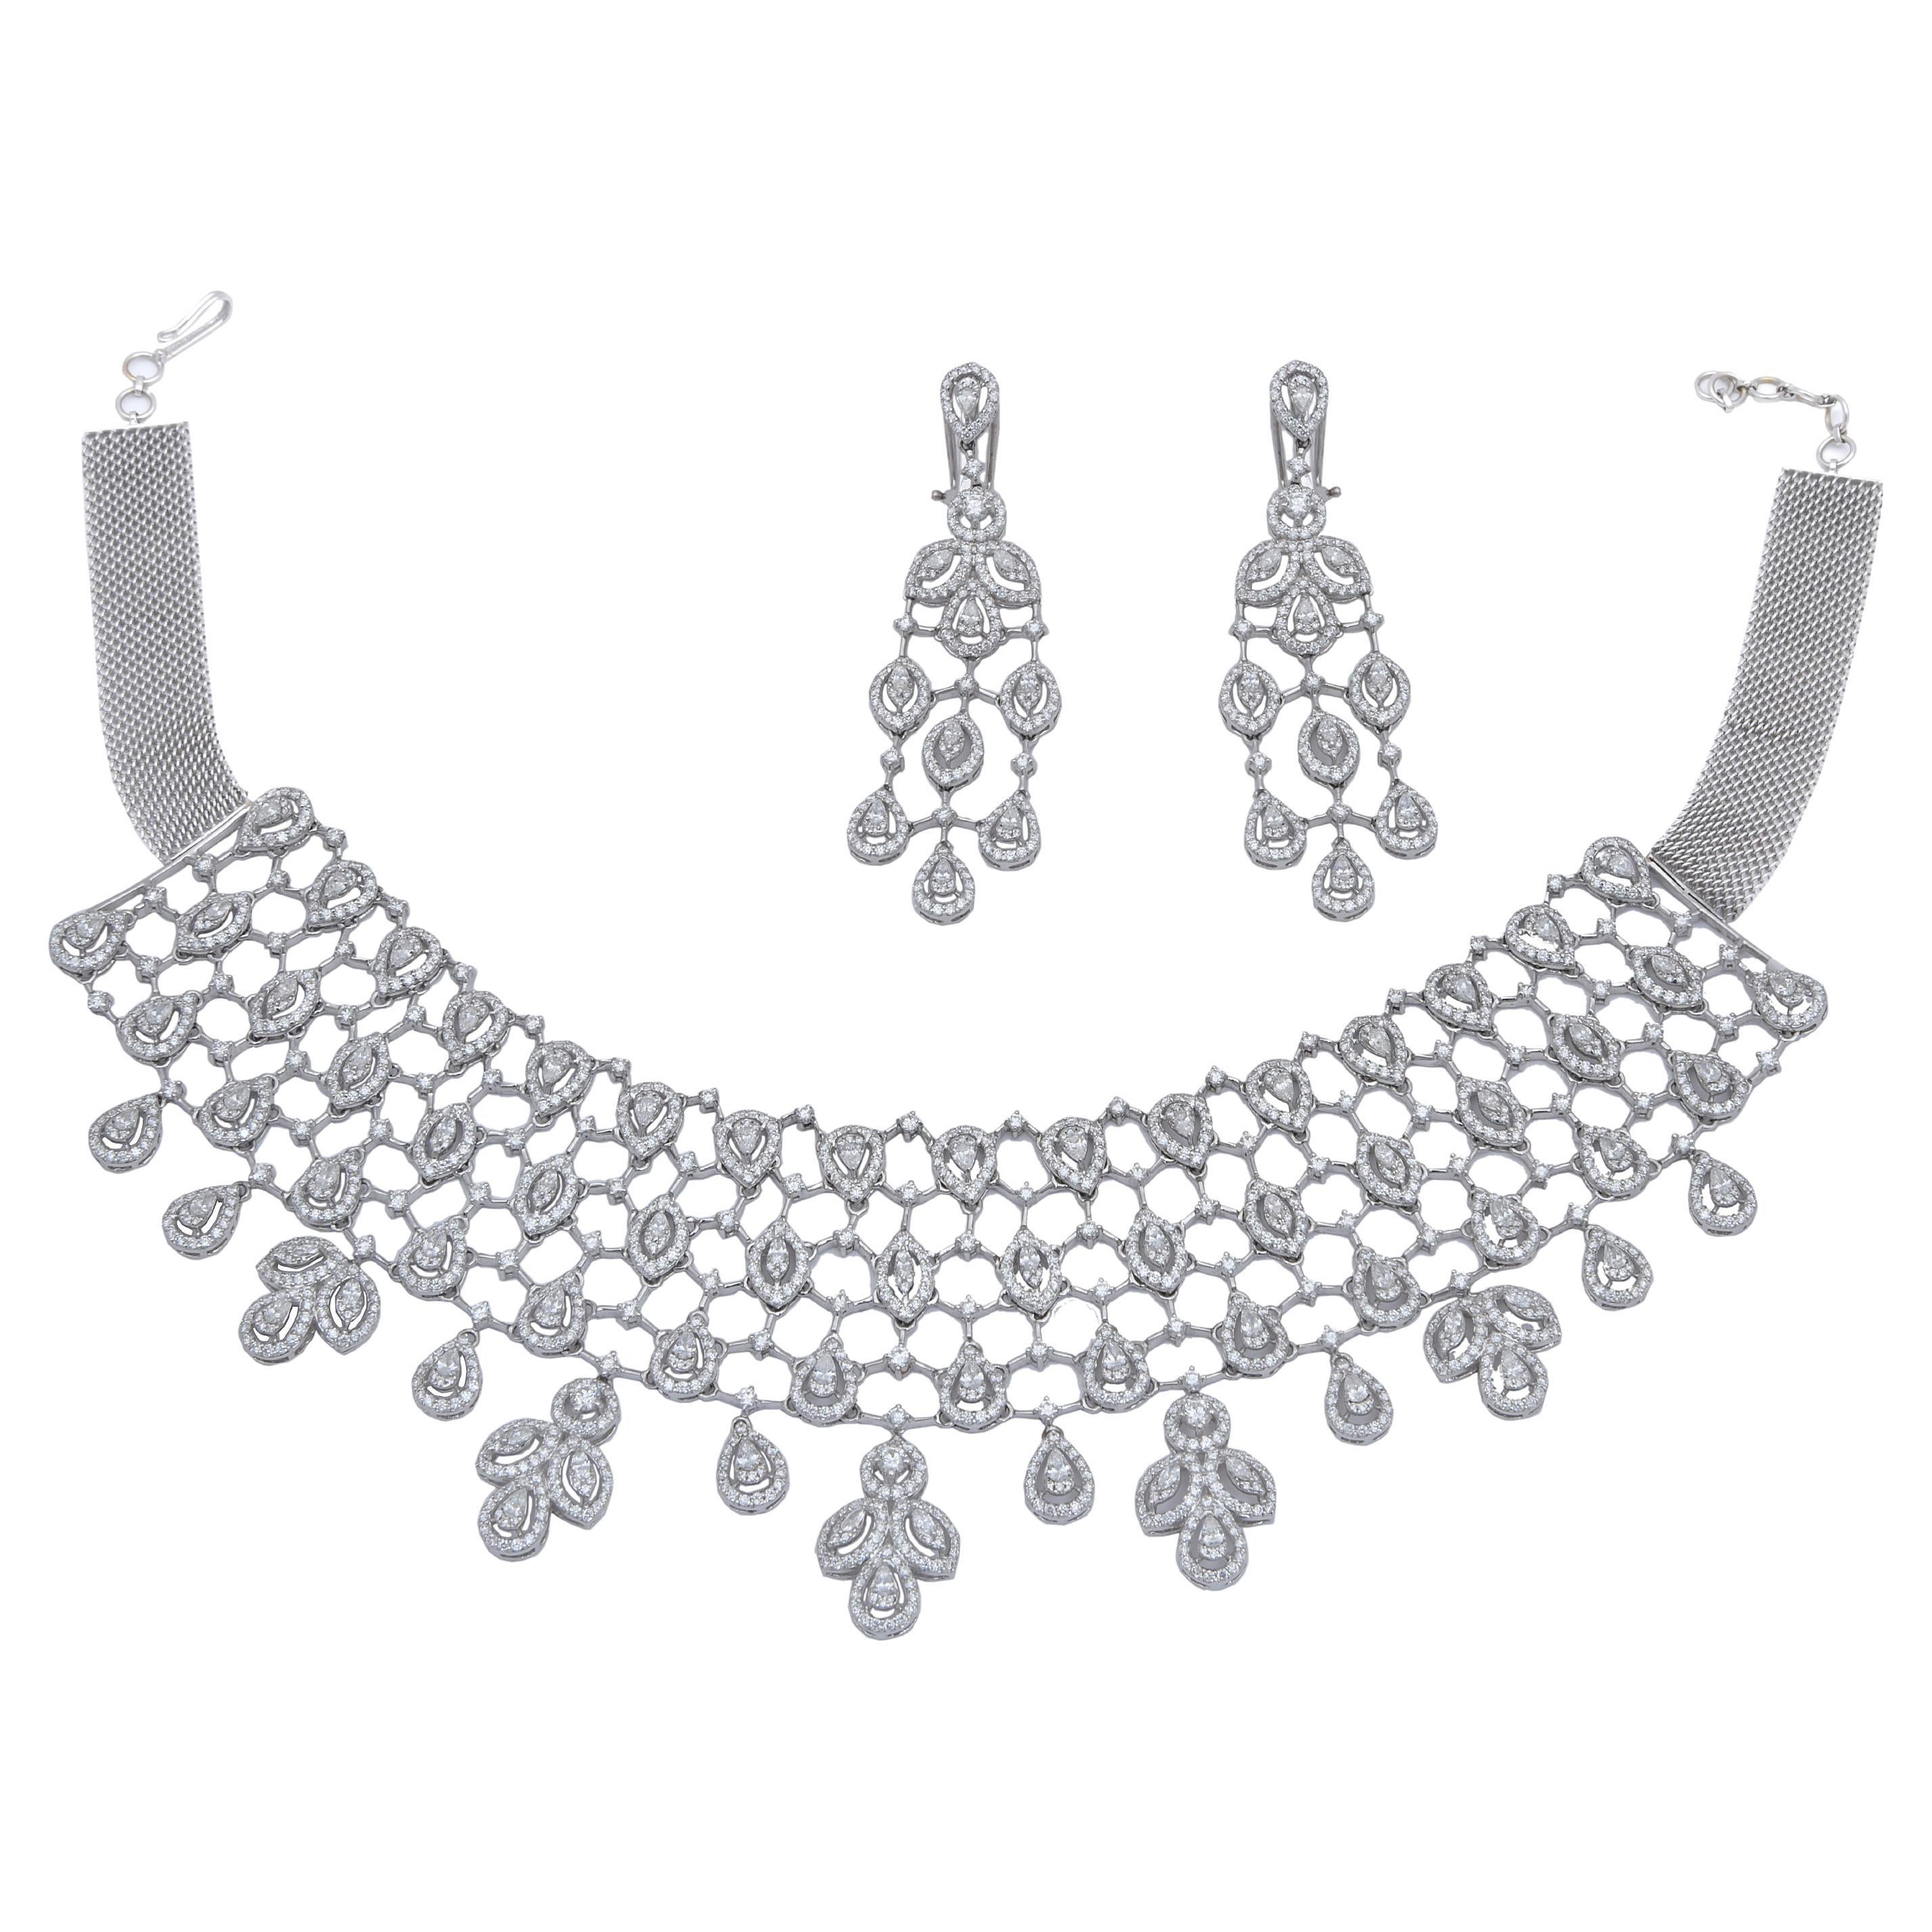 Natural Diamond Necklace with 23.88cts Diamond and Gold 14k